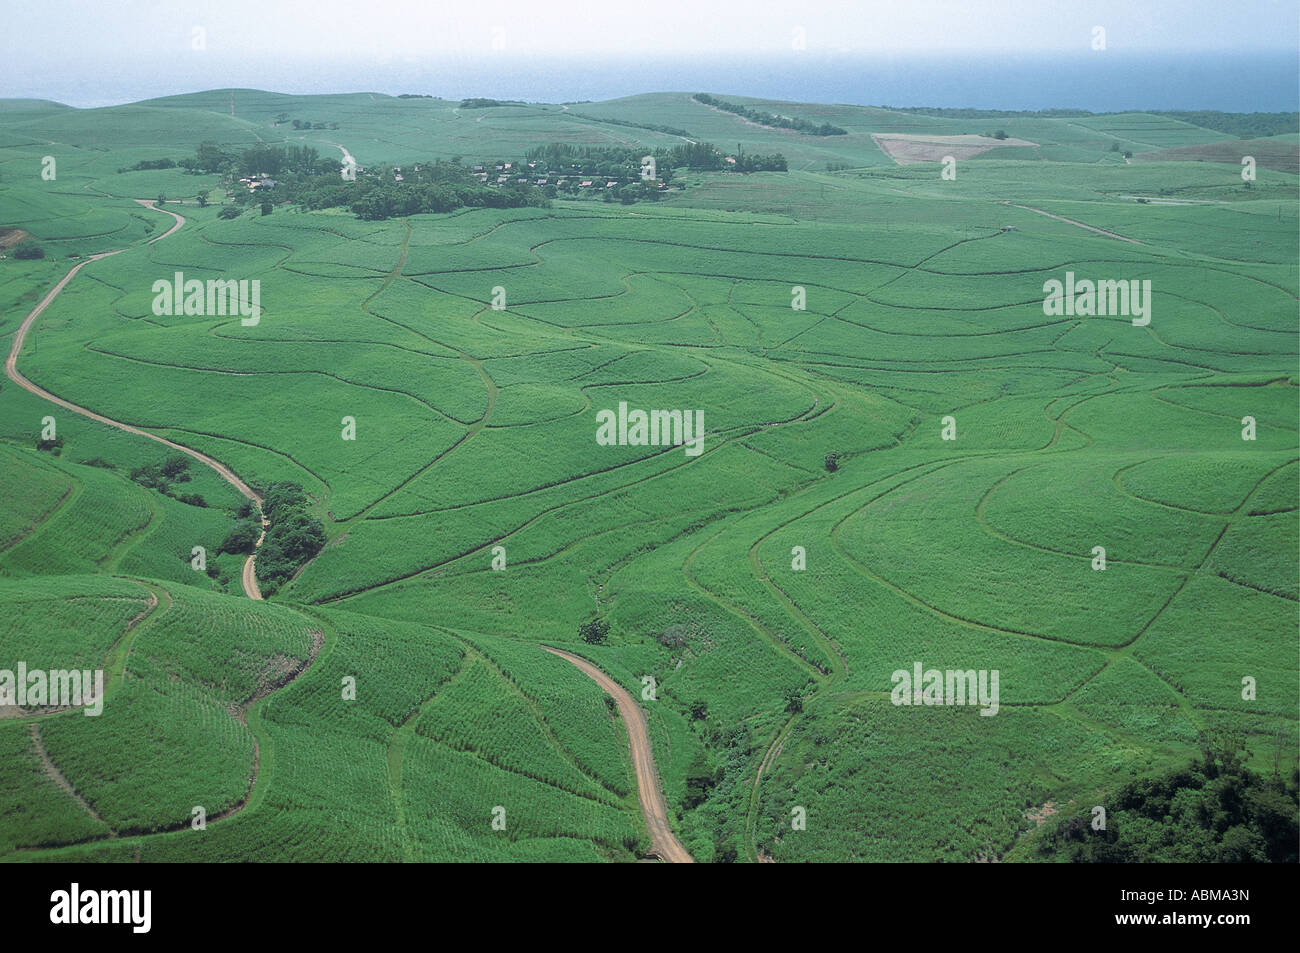 Aerial view of sugar cane plantations Natal Coast South Africa Indian ocean sea in the distance Stock Photo